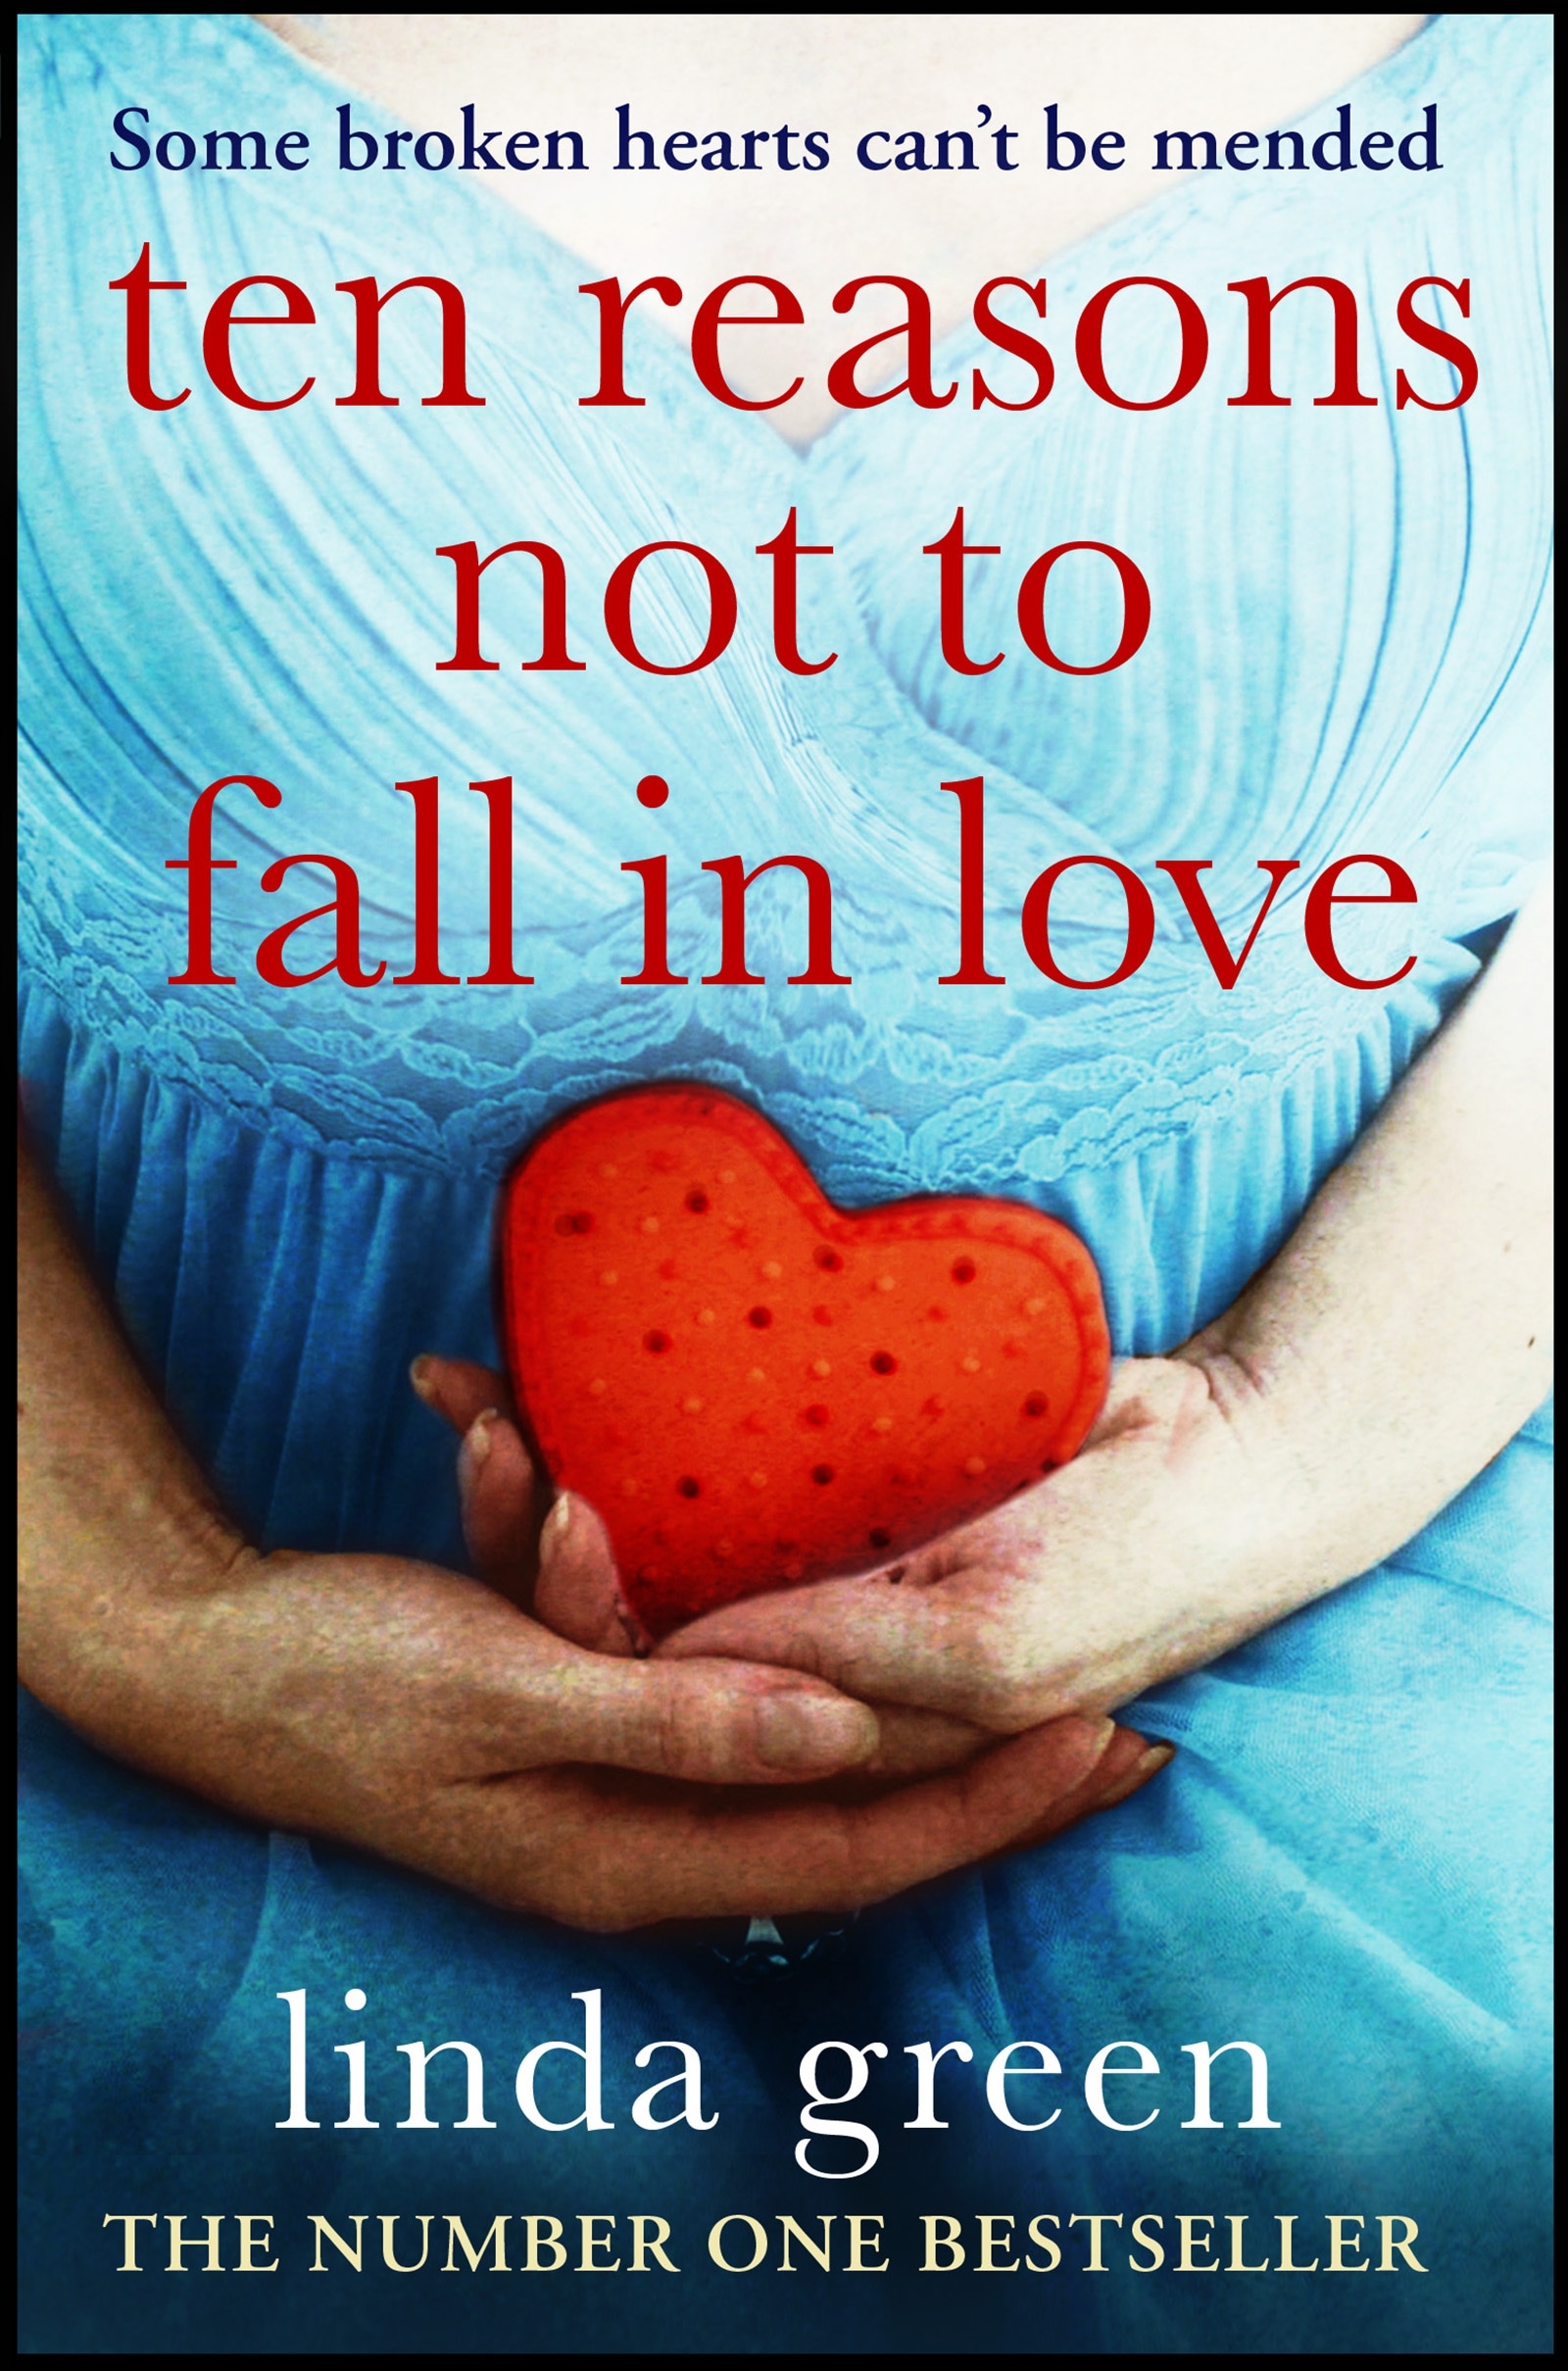 Book “Ten Reasons Not to Fall In Love” by Linda Green — April 18, 2019